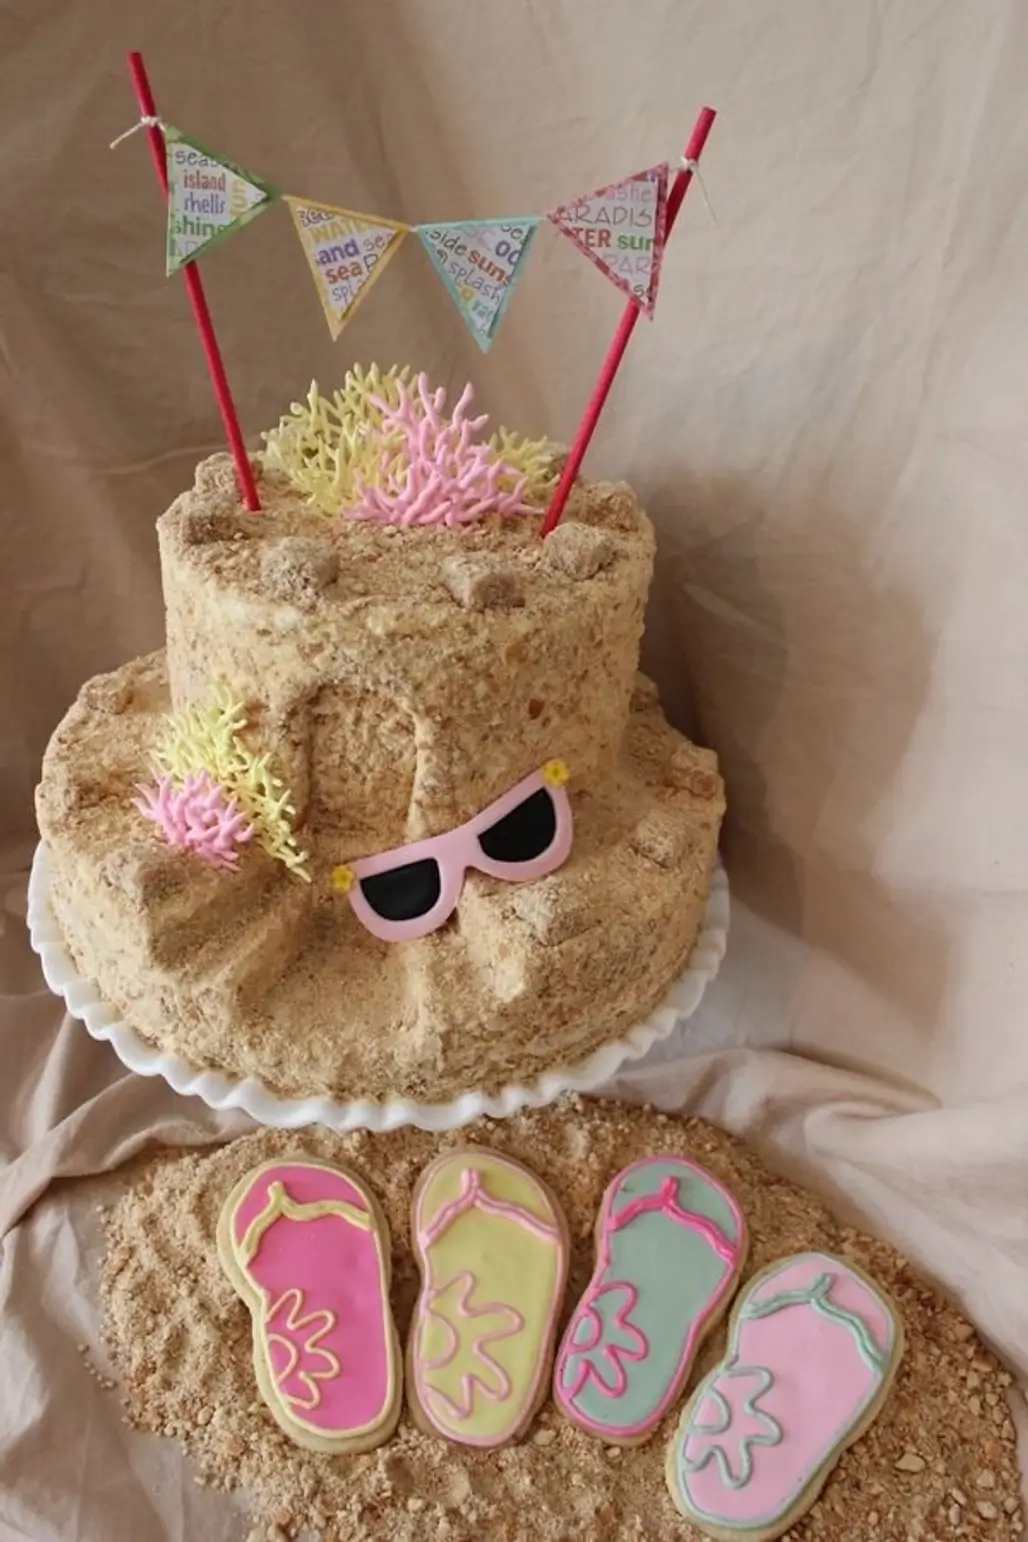 Sand Castle Cake and Flip Flop Cookies